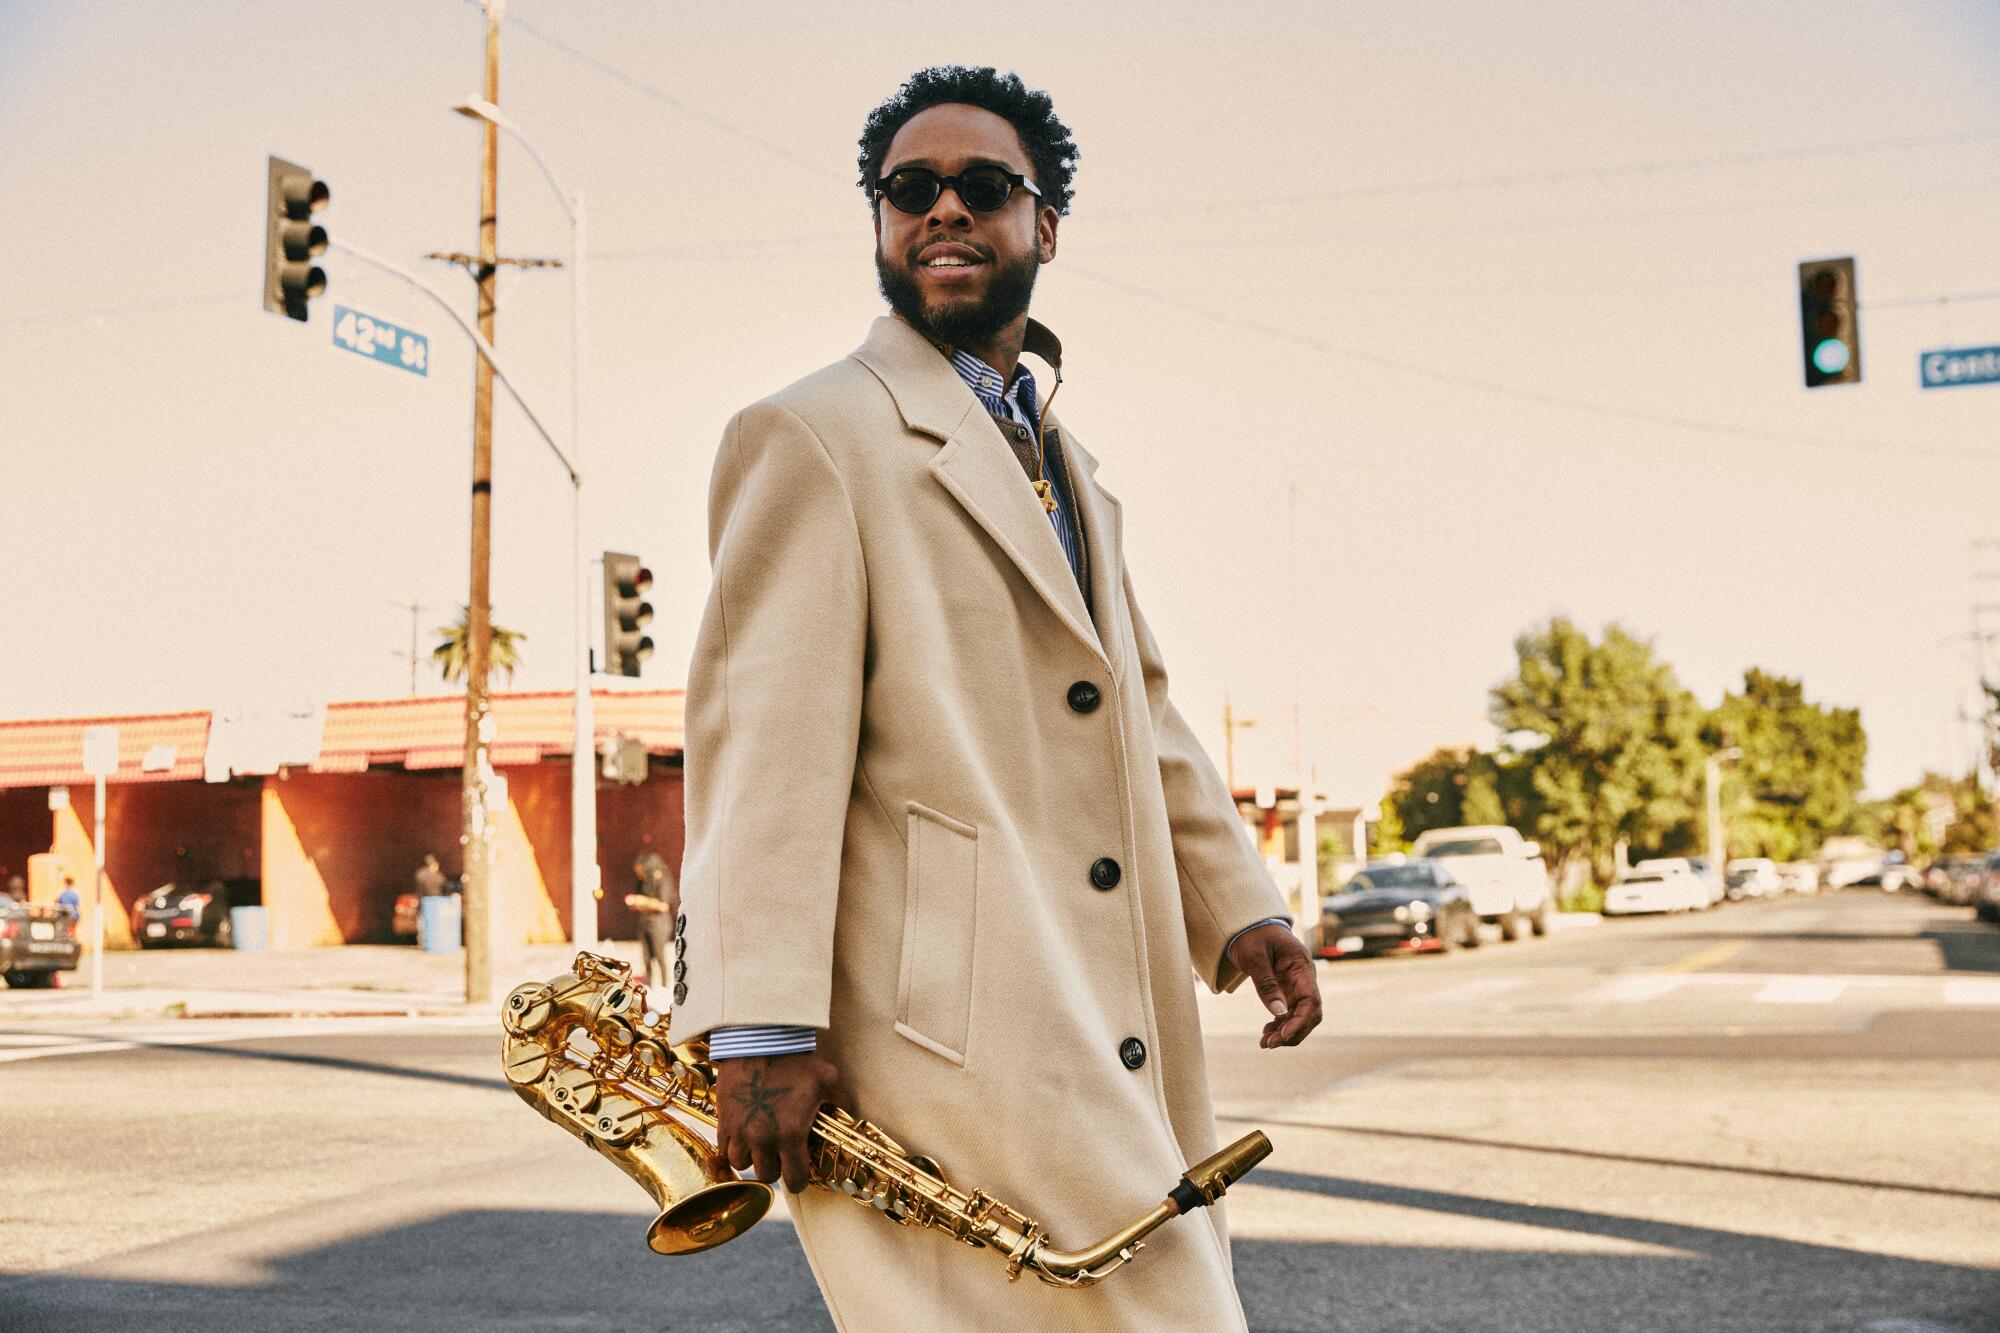 Terrace Martin crosses the street, smiling and carrying a saxophone